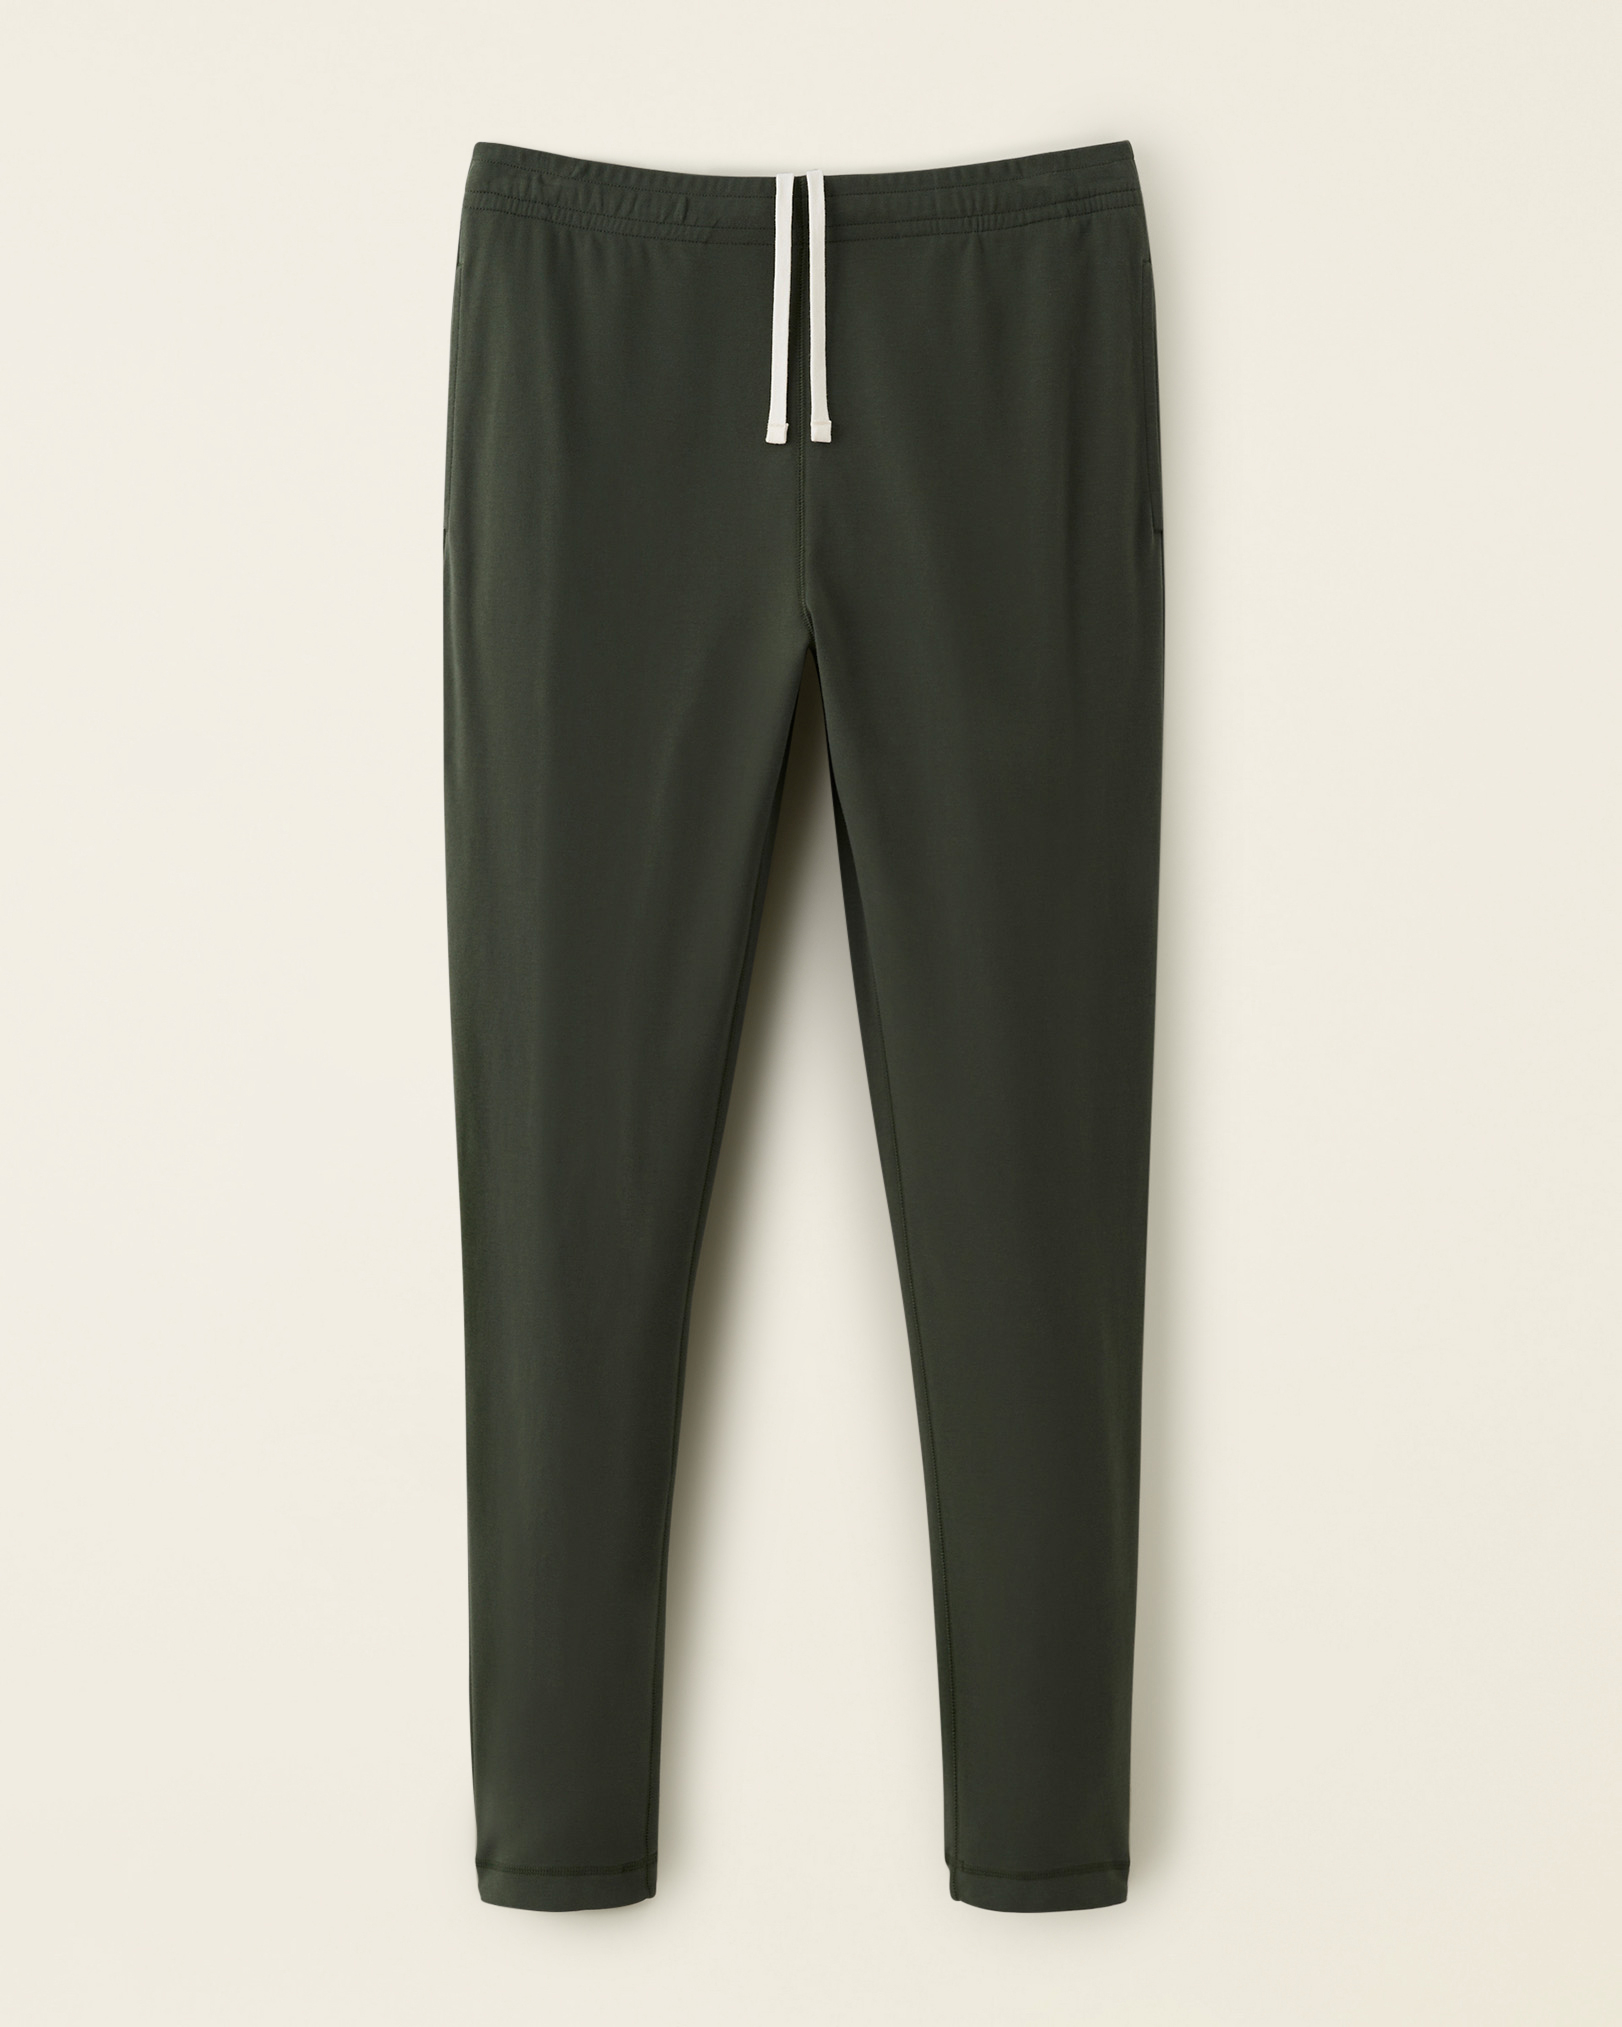 Roots Pender Pant in Climbing Ivy